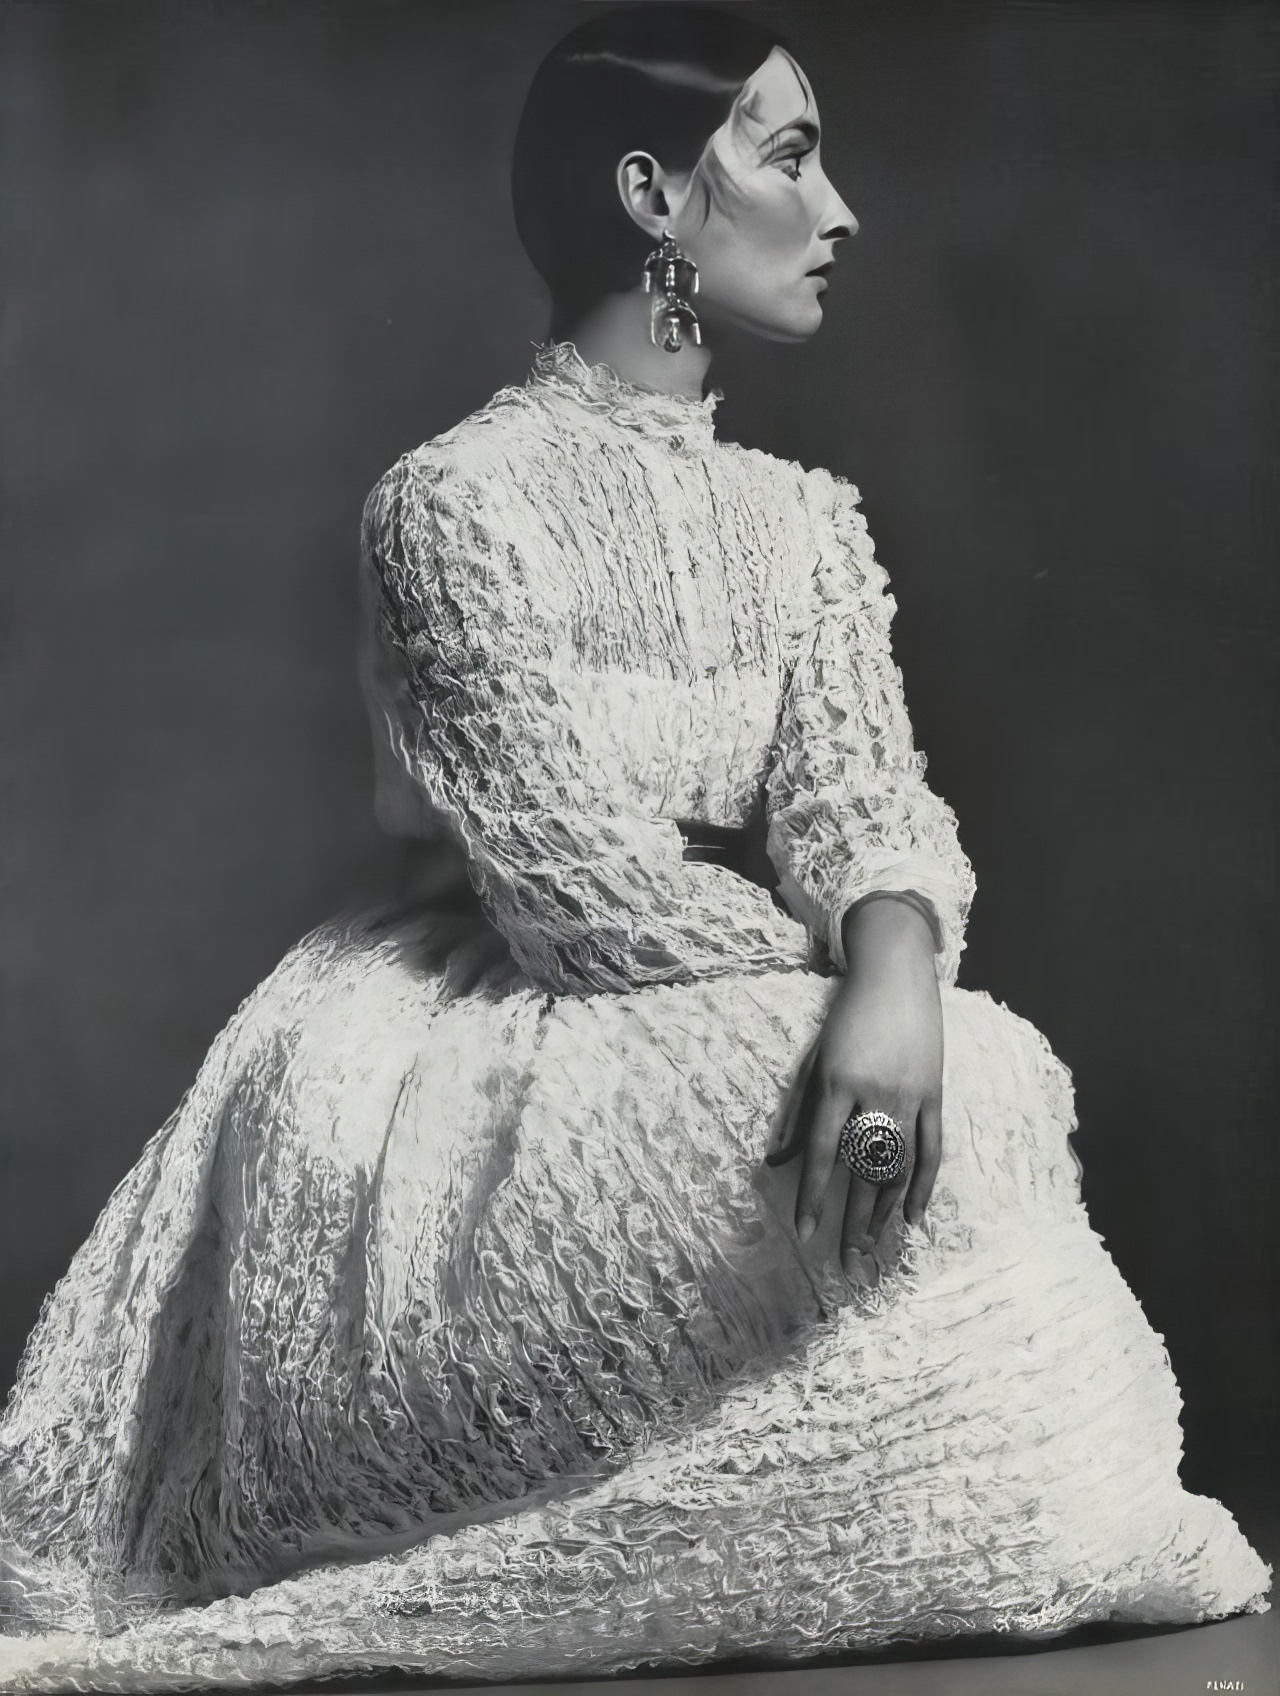 Model in an Edwardian-style lace dress by Anne Fogarty, Vogue, April 15, 1968.